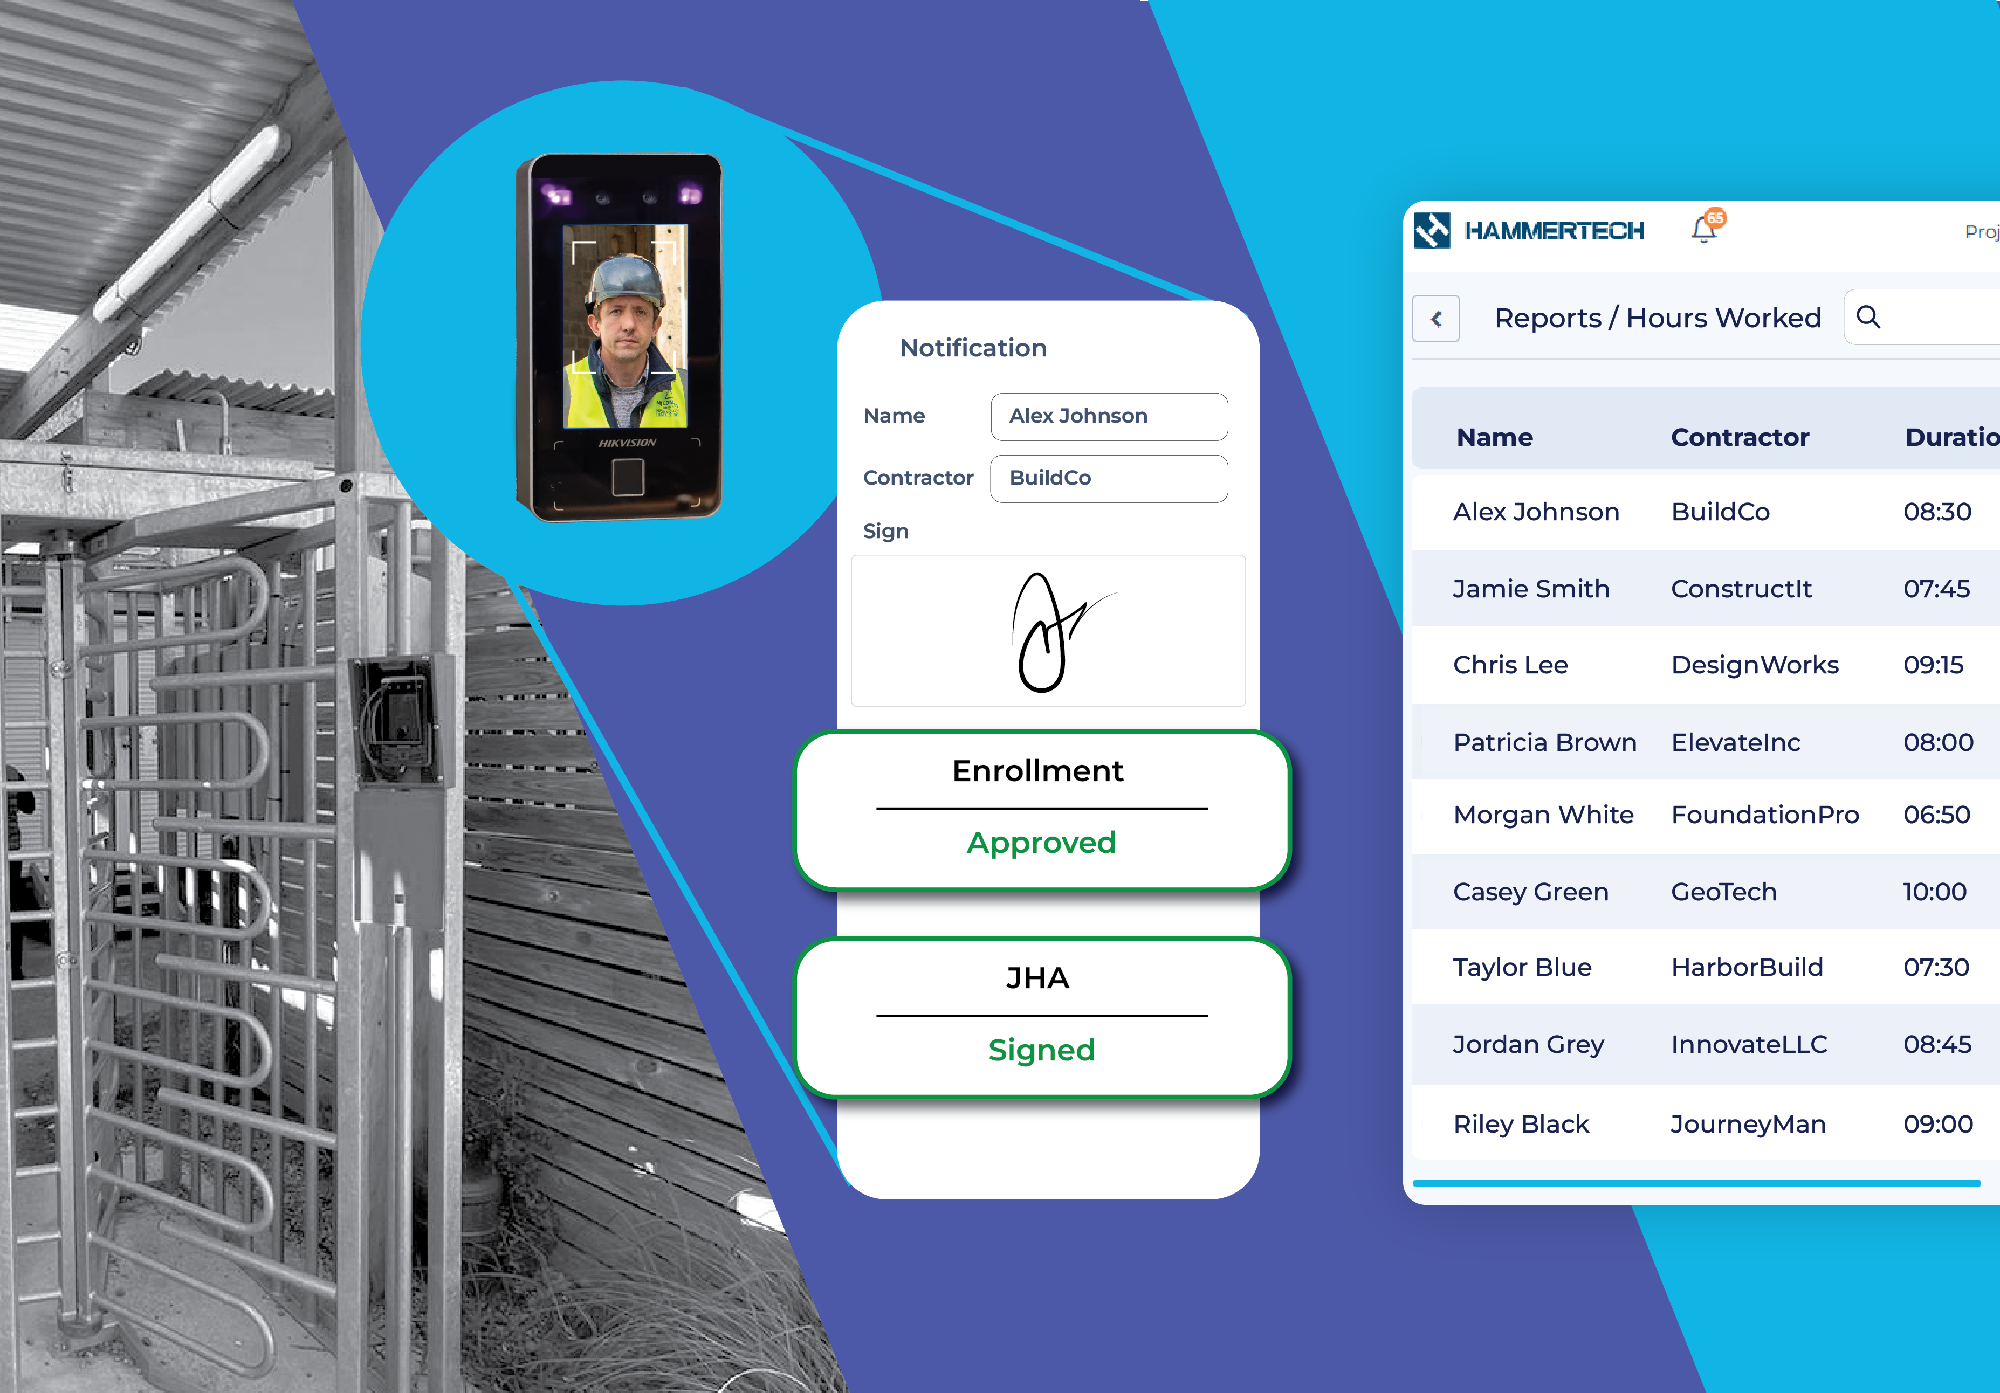 Easy site access control after easy construction orientation approval, showing facial recognition and the check-points to ensure access approval.